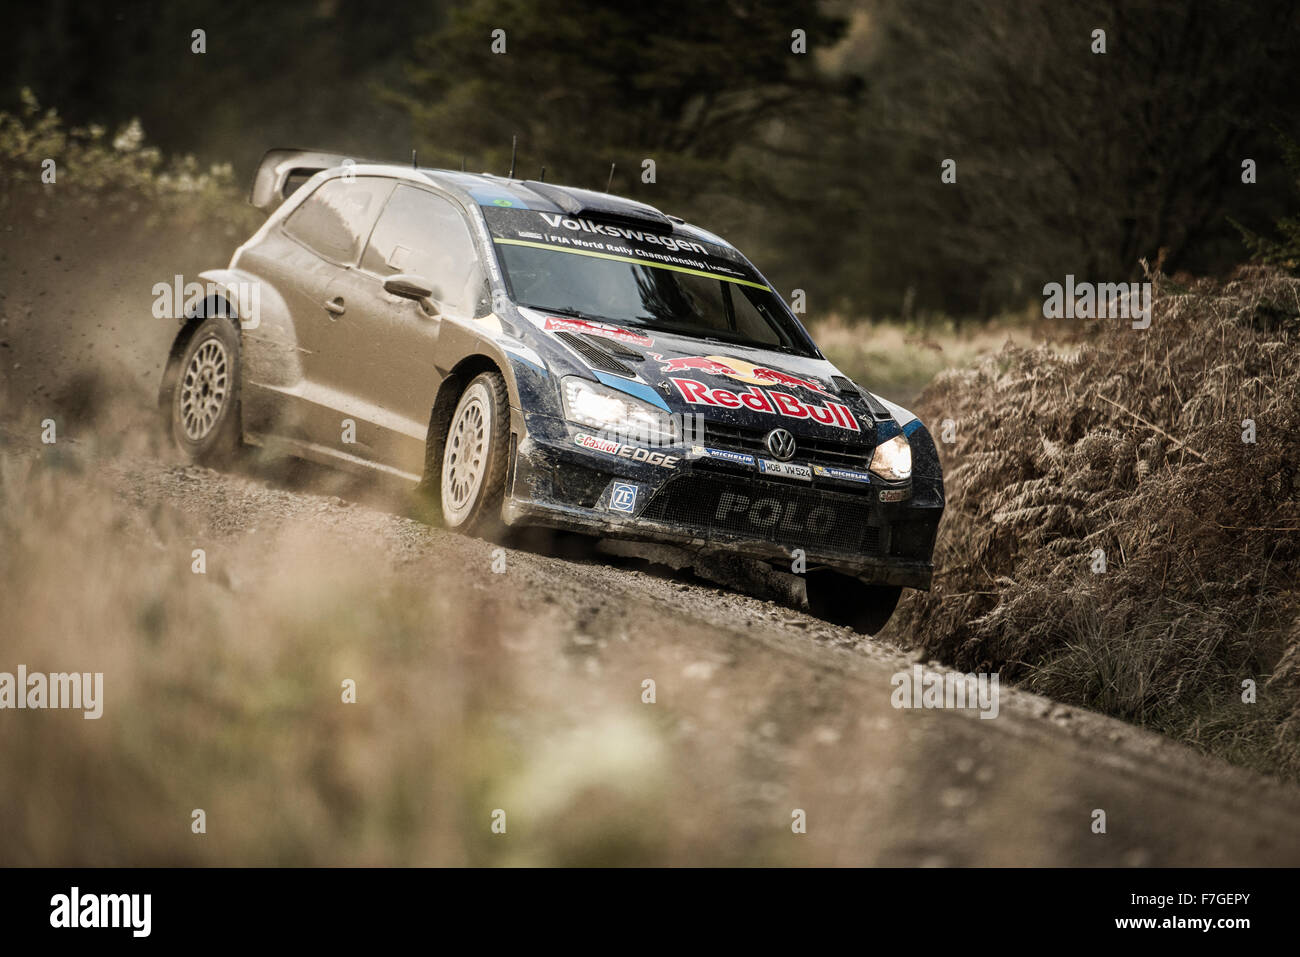 Sebastien Ogier & Julien ingrassia on Stage 3 of Wales Rally GB 2015 in their Vw Polo R WRC Stock Photo